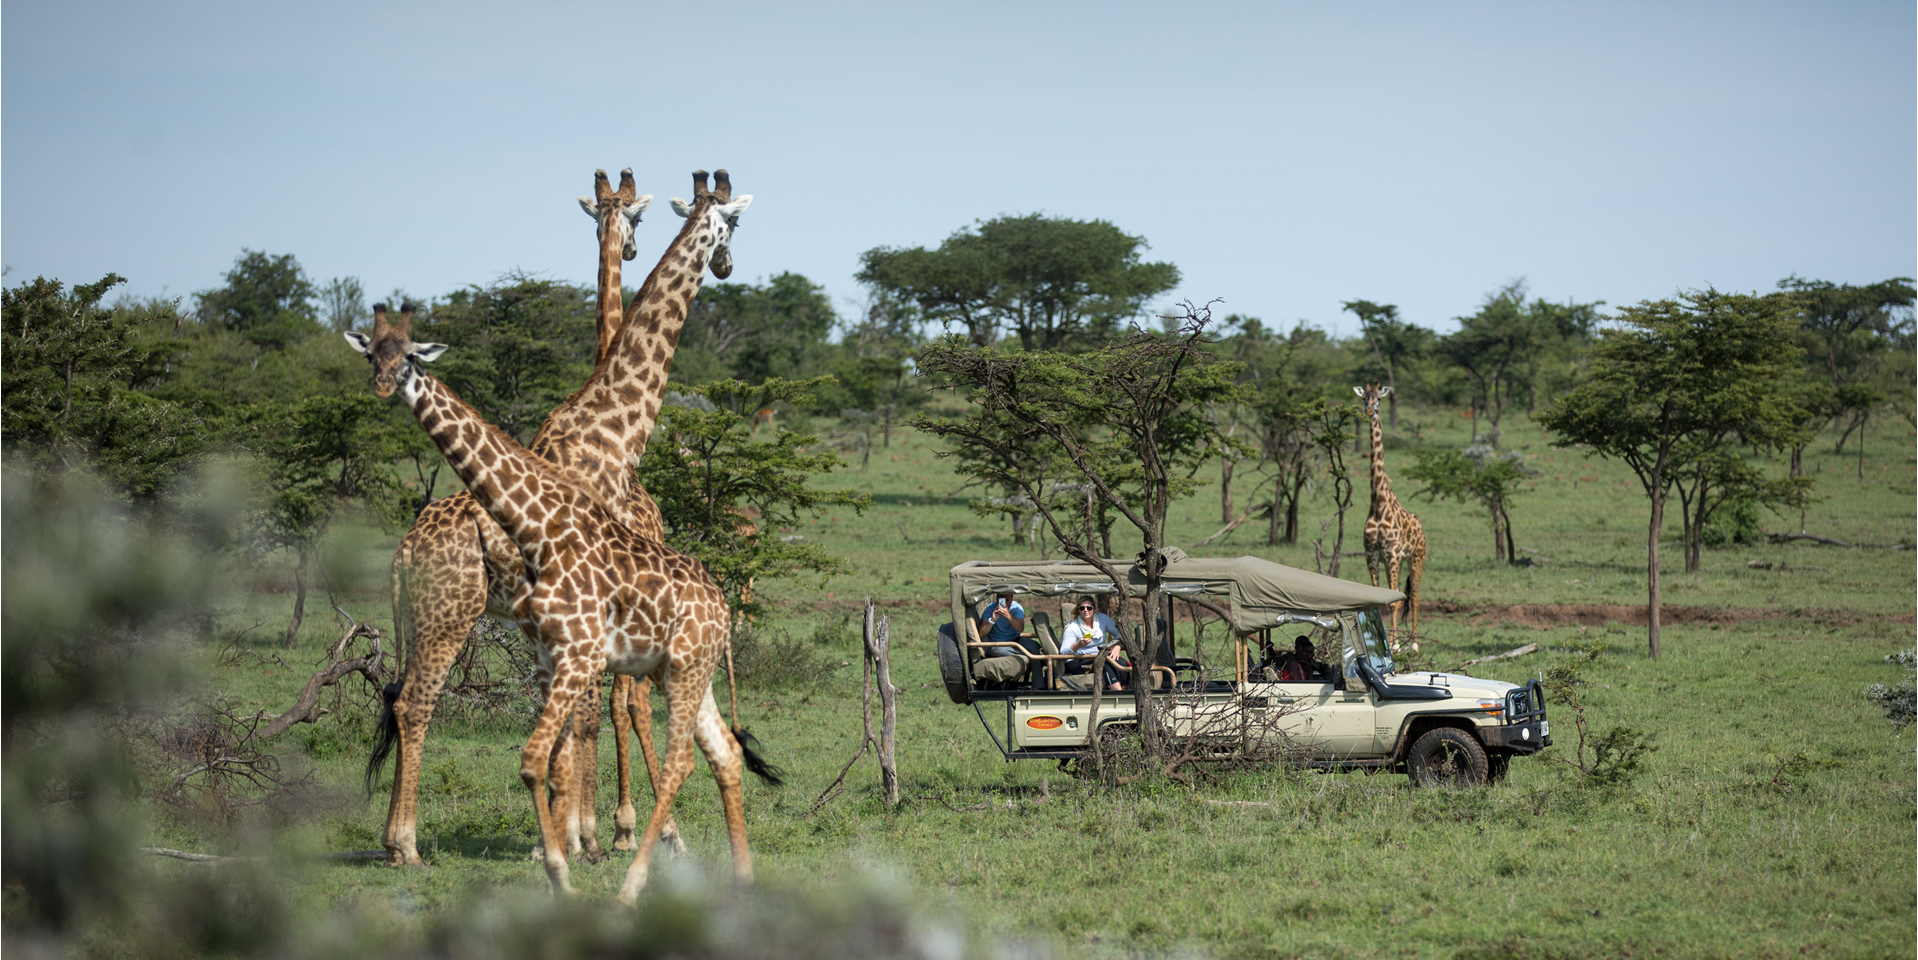 kenya ministry of tourism and wildlife